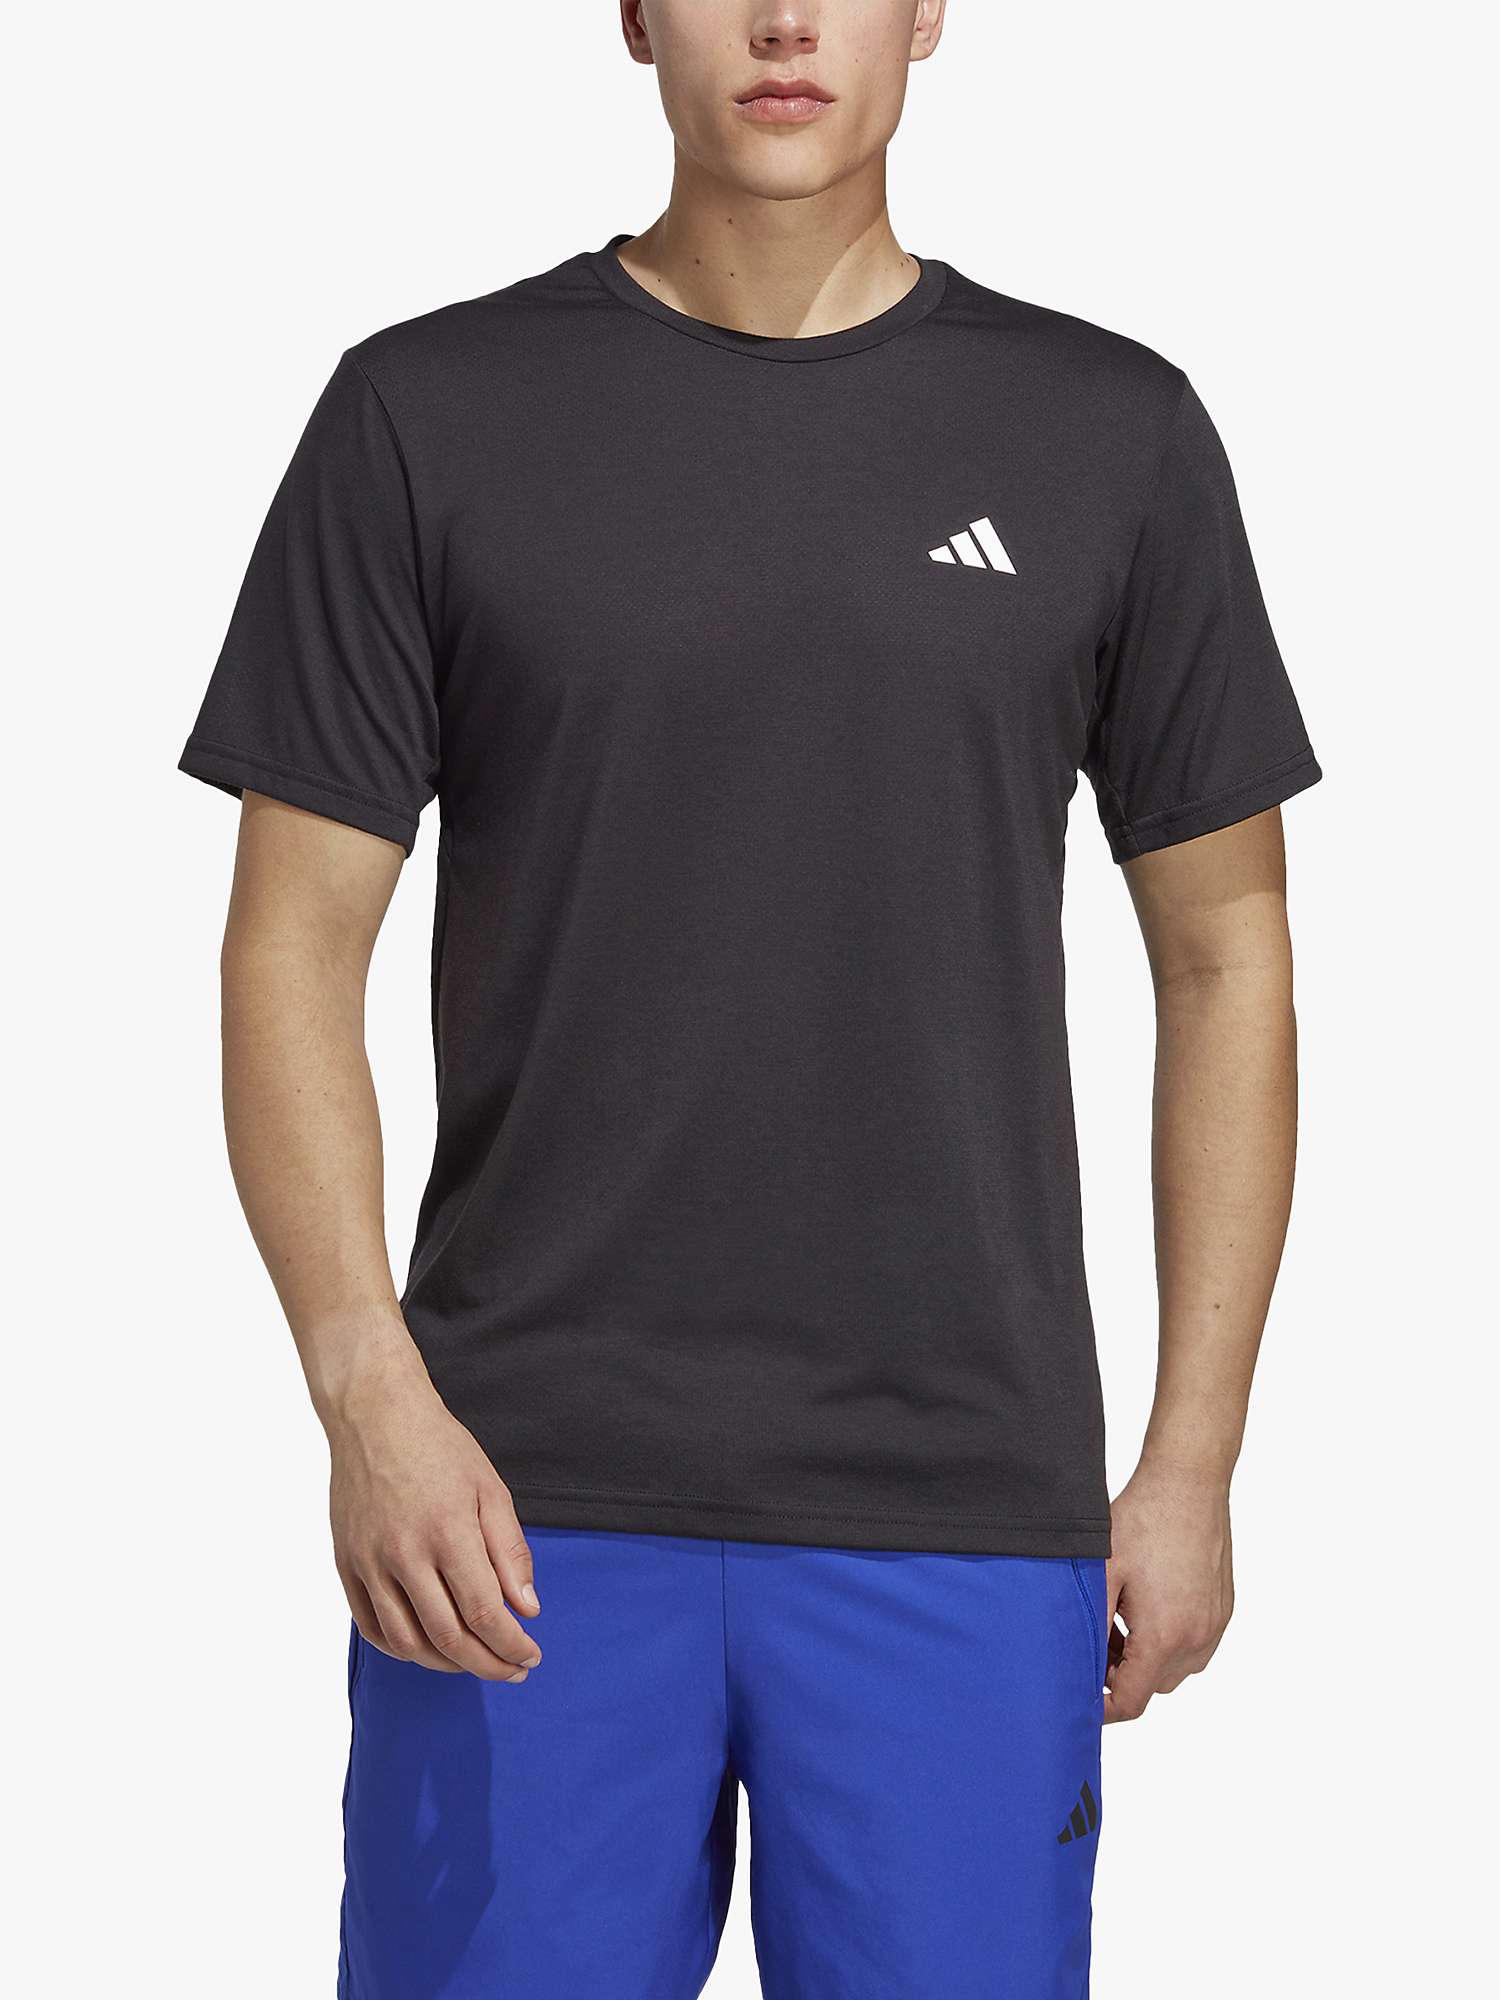 Buy adidas Essentials Comfort Recycled Gym Top Online at johnlewis.com